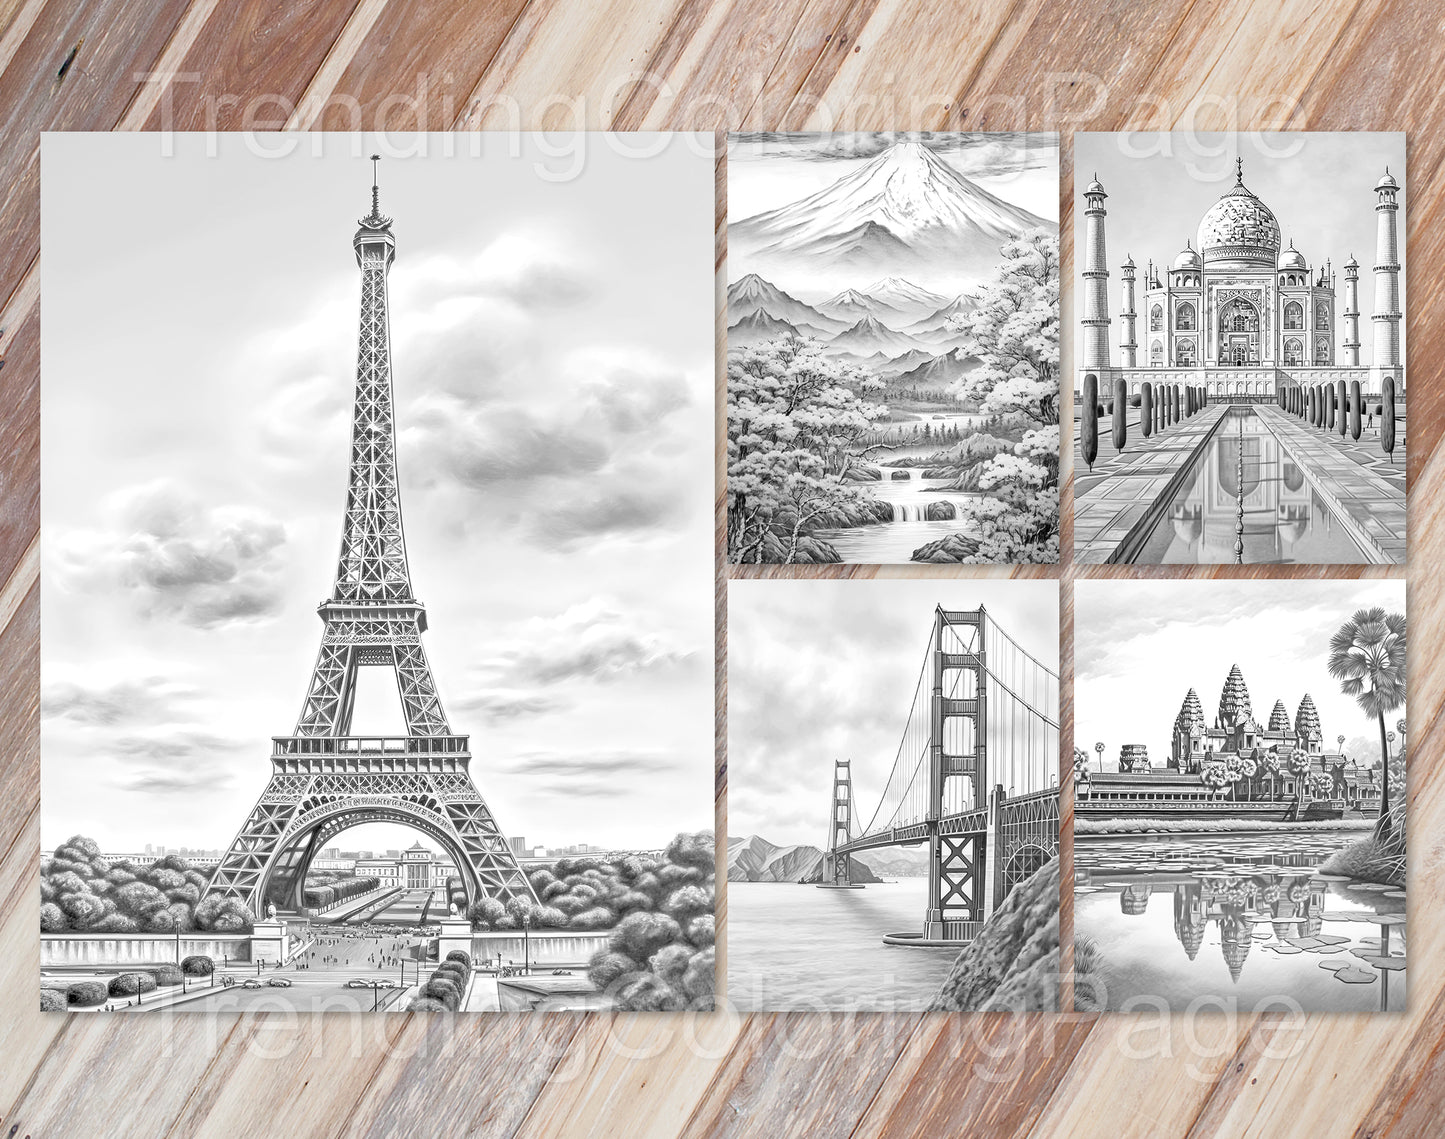 25 Around The World Grayscale Coloring Pages - Instant Download - Printable Dark/Light